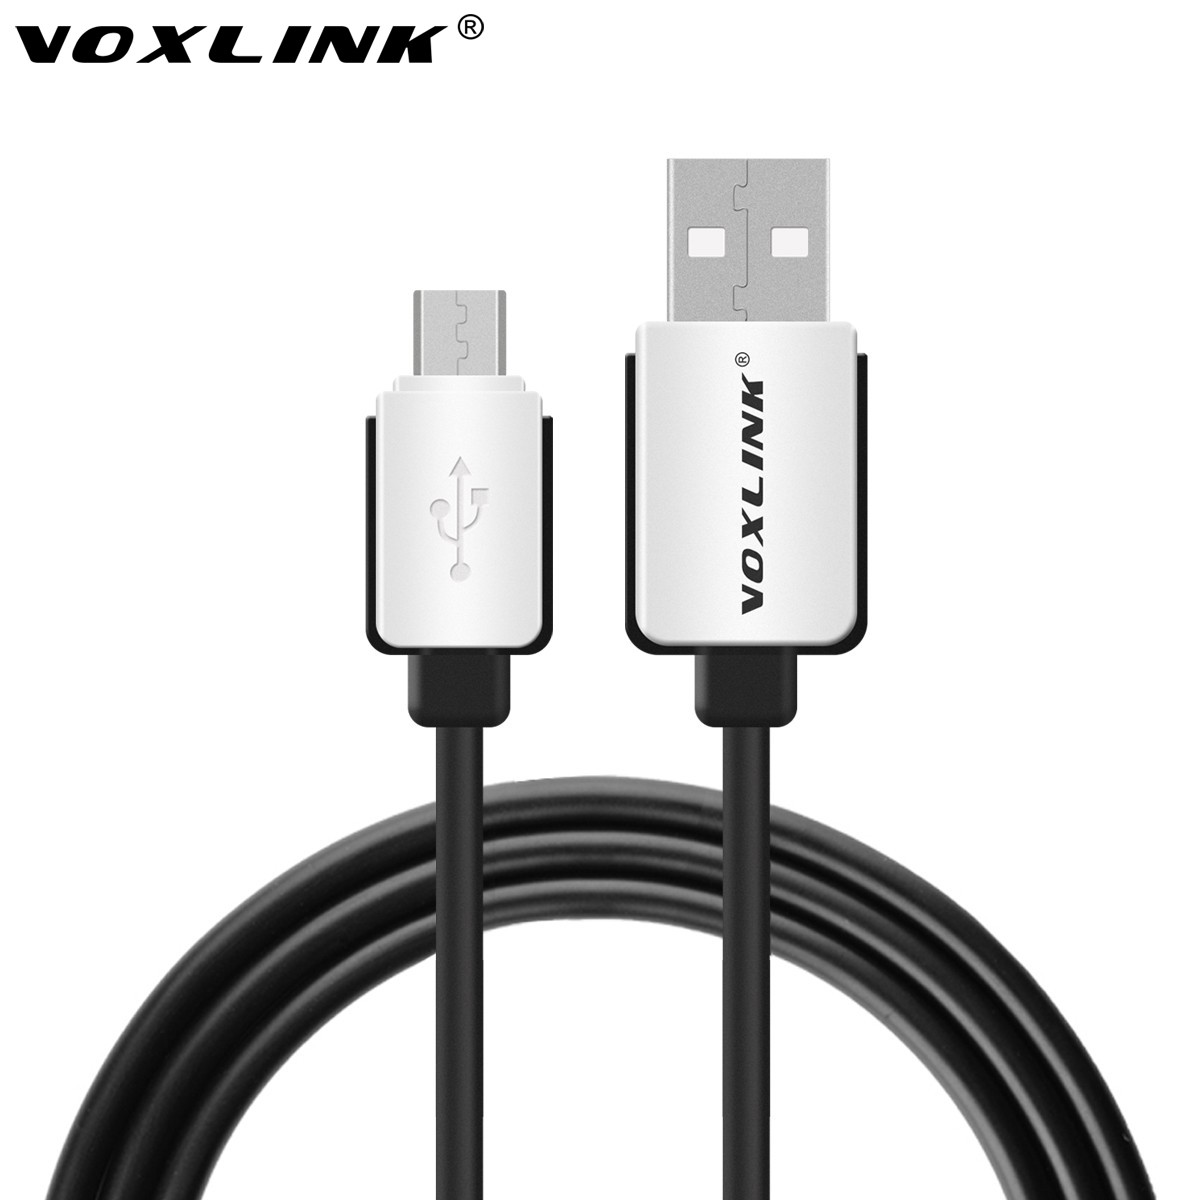 VOXLINK 3ft/1m Micro USB Cable Quick Charge 3.0 USB to Micro USB Cable for Samsung Galaxy S7 S6 Huawei Fast Quick Charger Cable